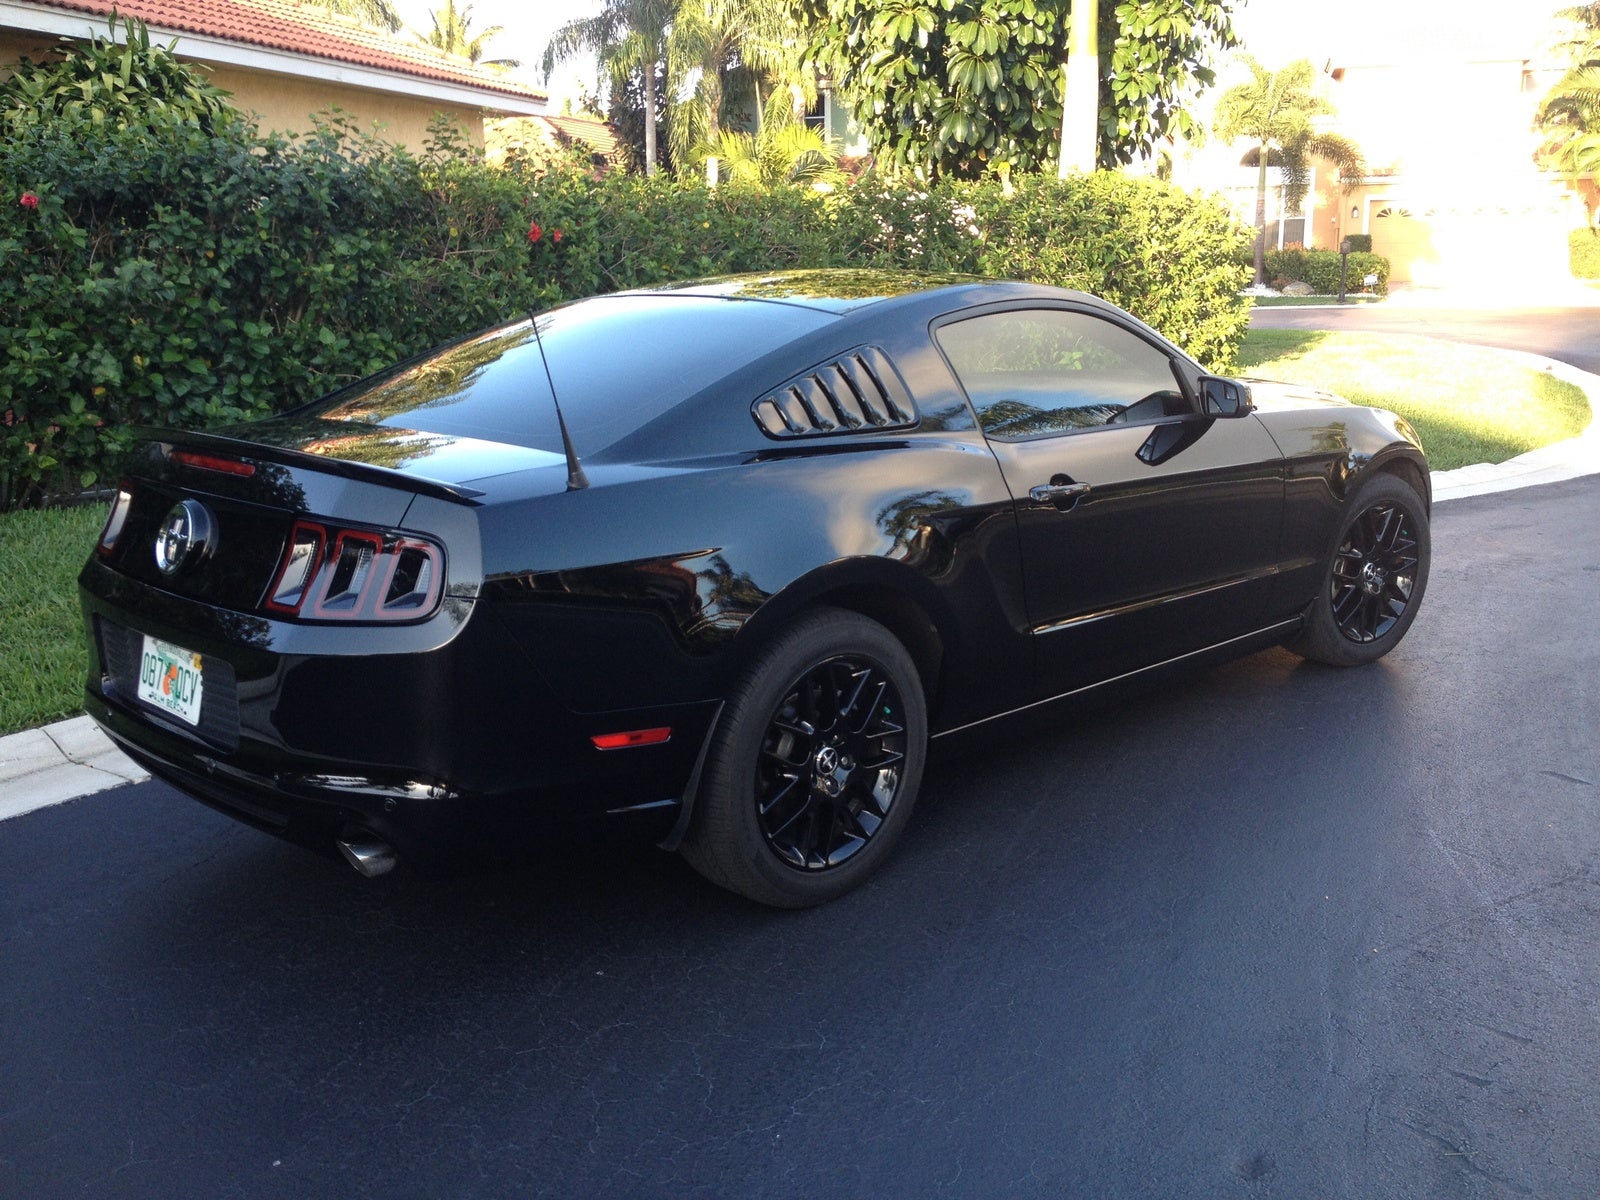 New 2015 / 2016 Ford Mustang For Sale - CarGurus